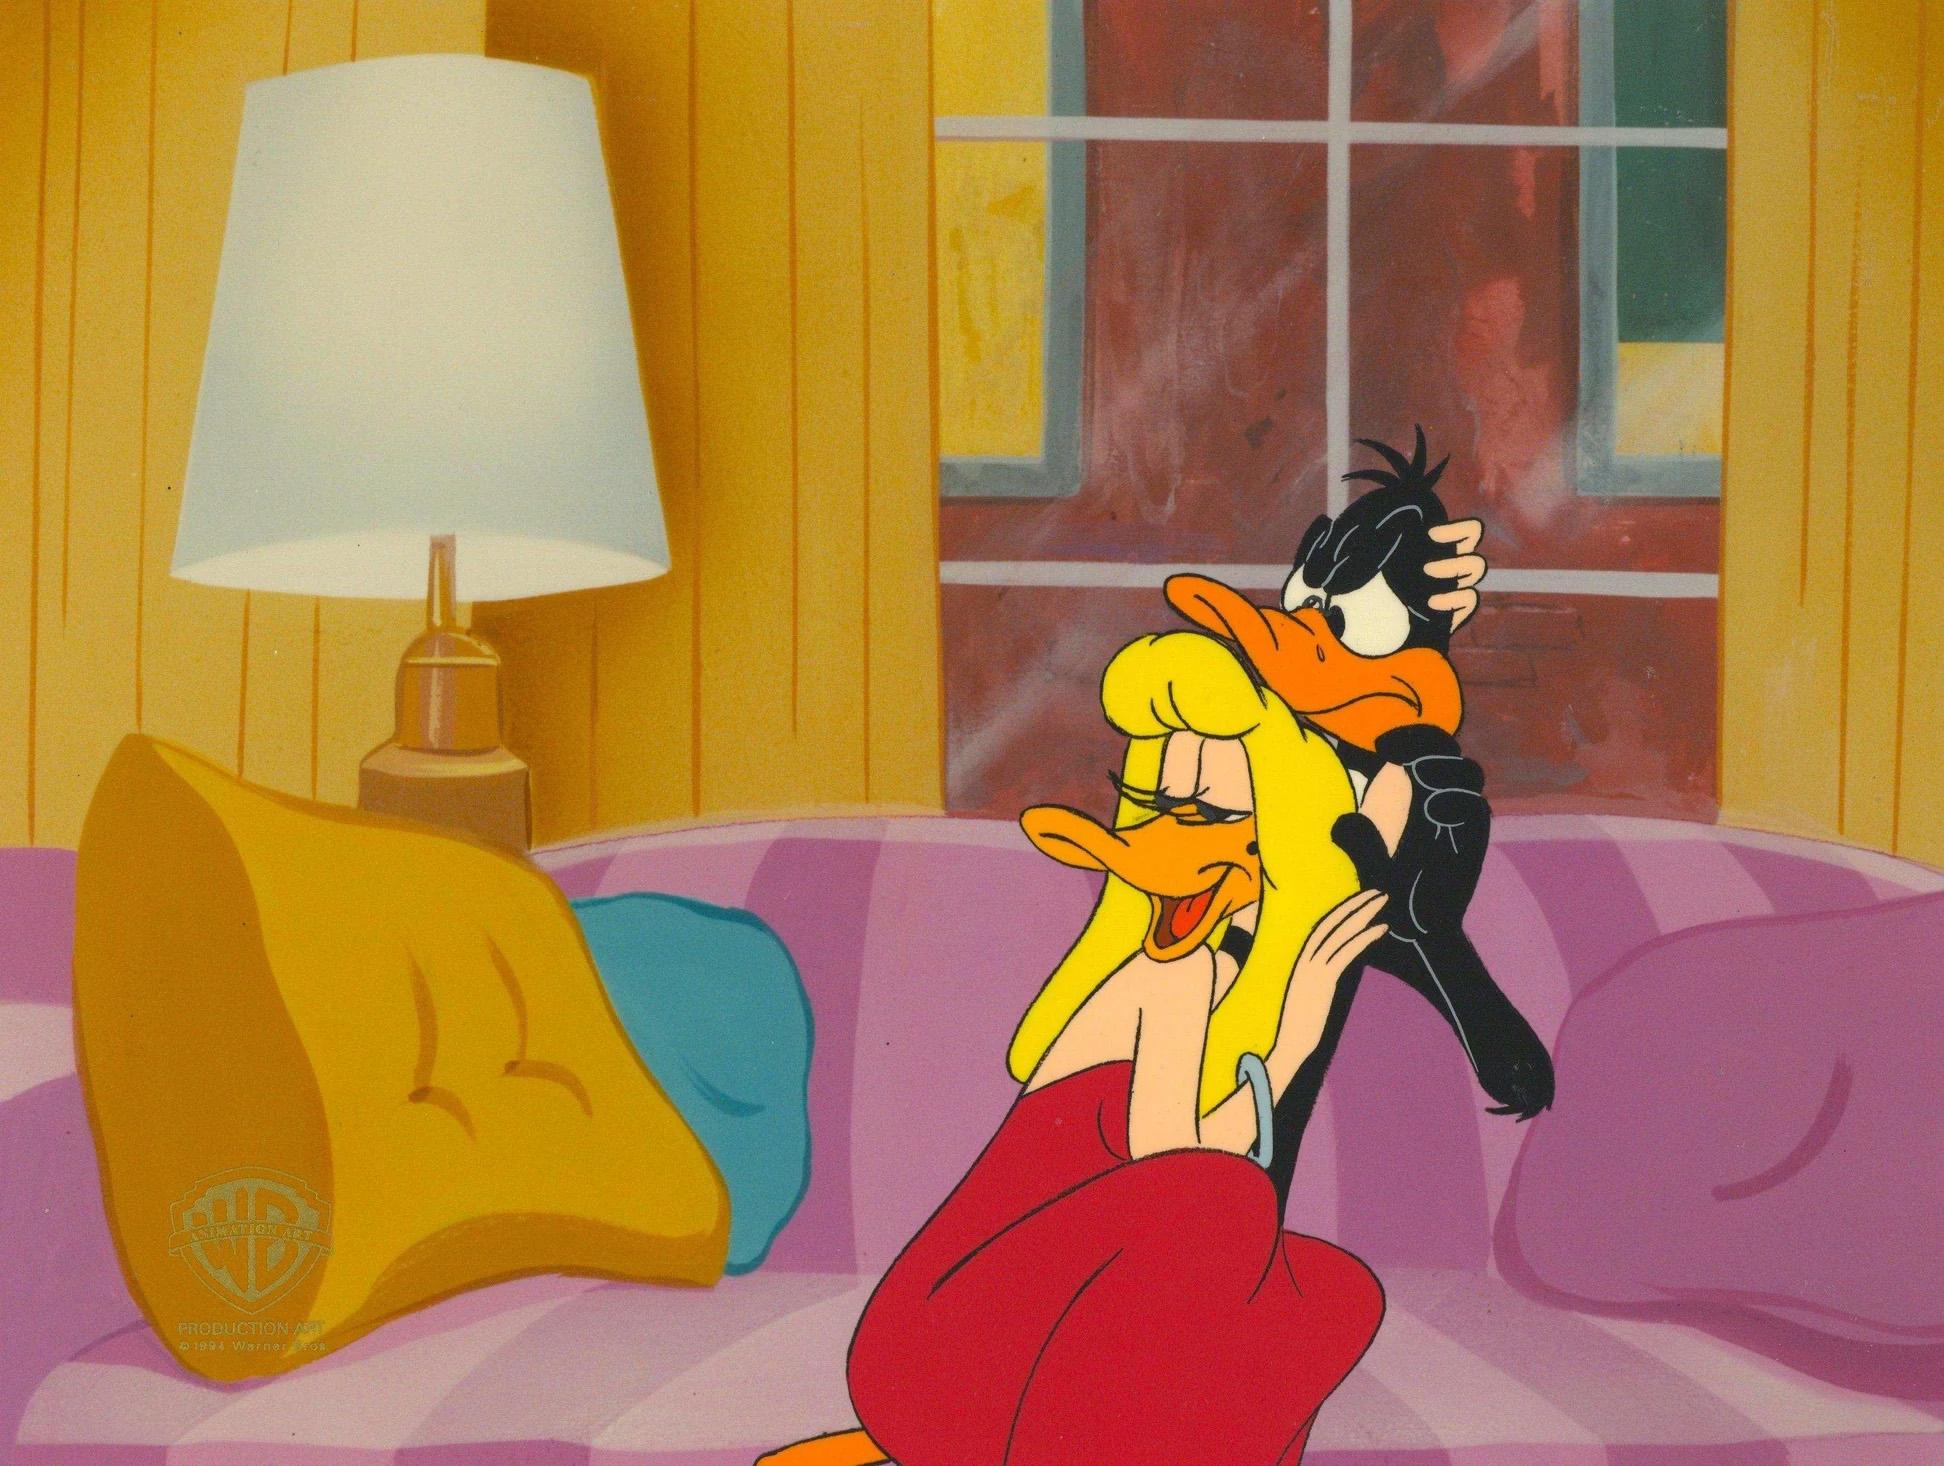 Looney Tunes Original Production Cel: Daffy Duck and Melissa Duck - Art by Looney Tunes Studio Artists